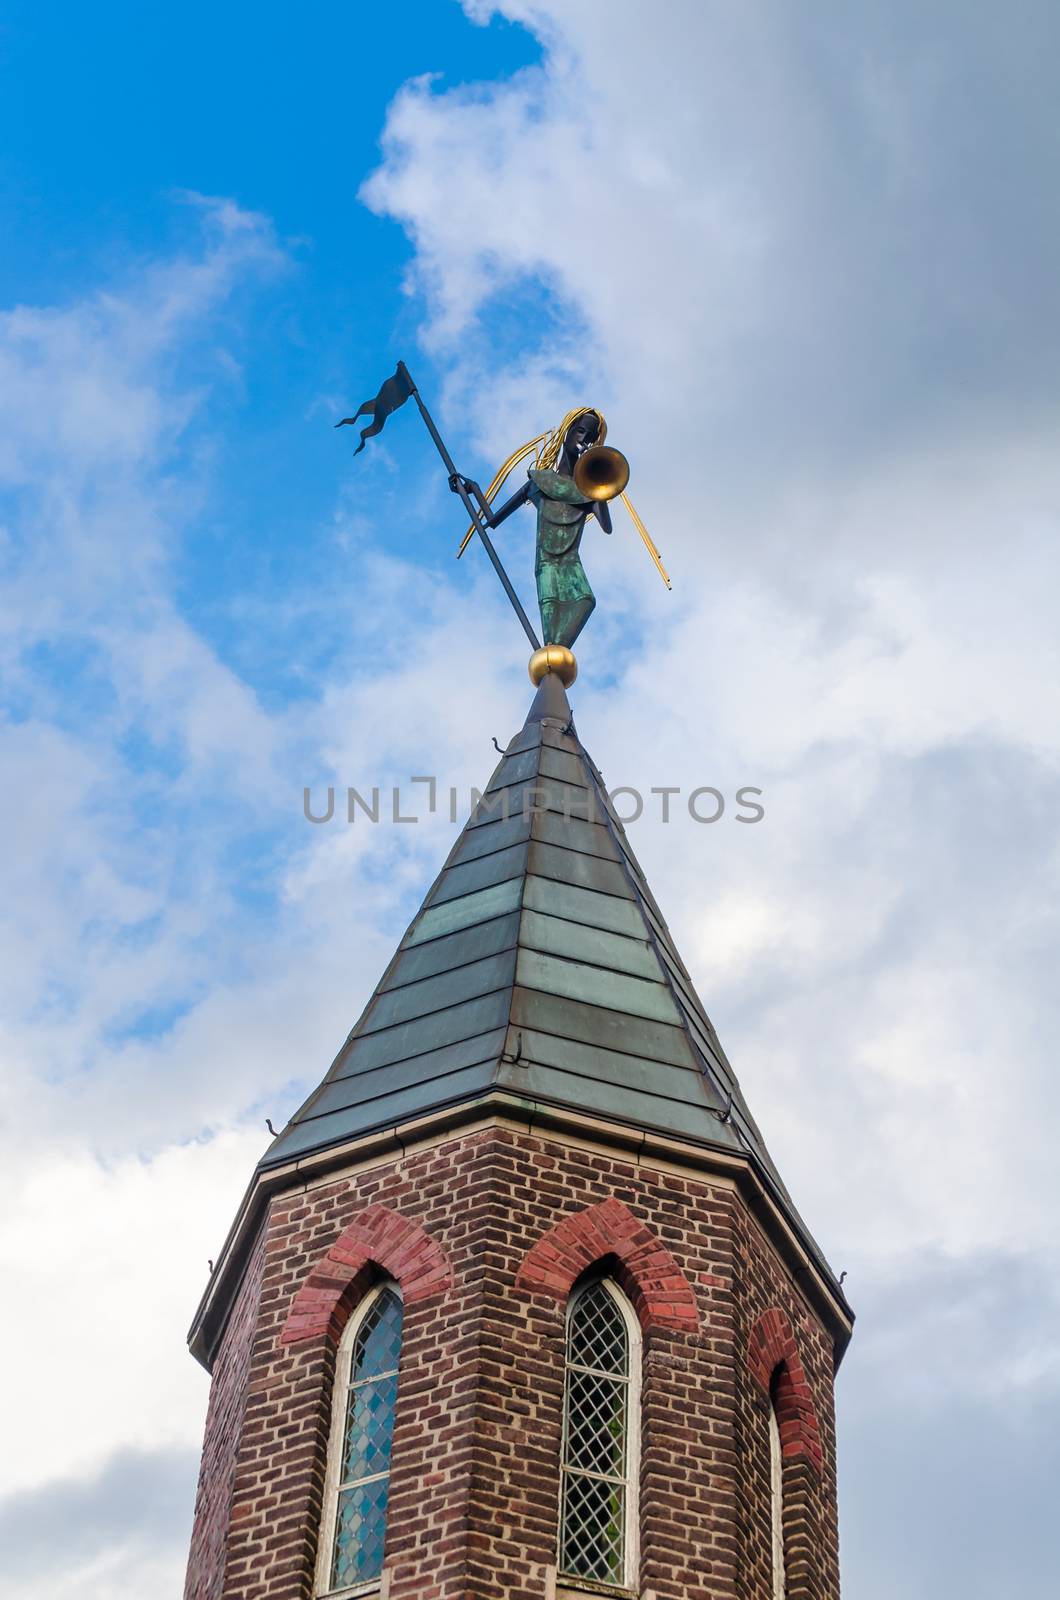 Church spire with trombonist before blue sky